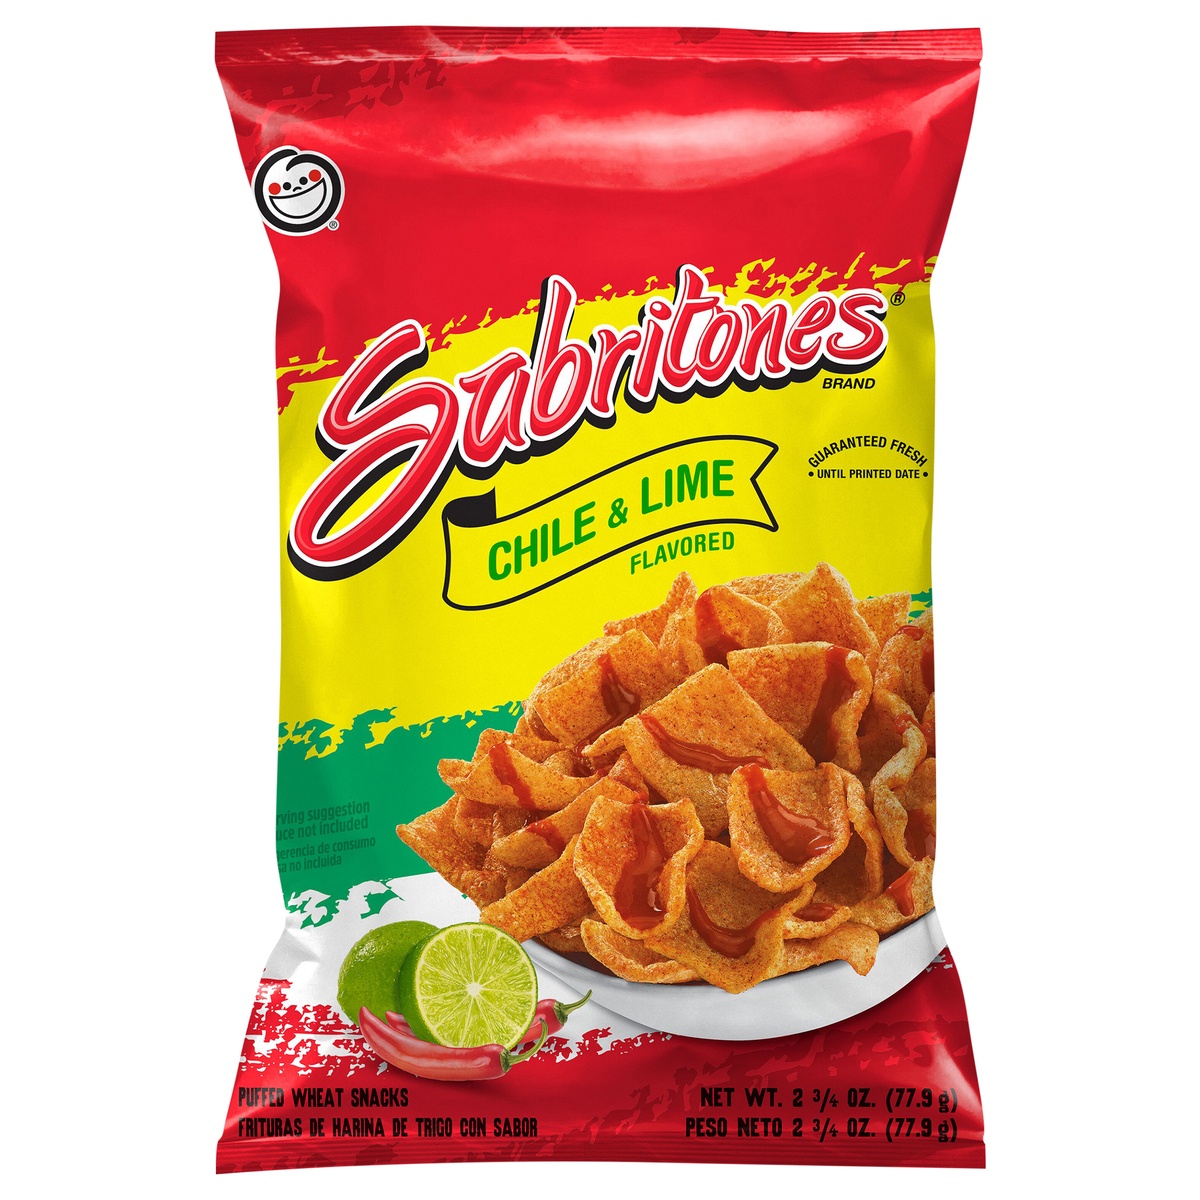 slide 1 of 5, Sabritones Puffed Wheat Snacks Chile & Lime Flavored 2 3/4 Oz, 2.75 oz